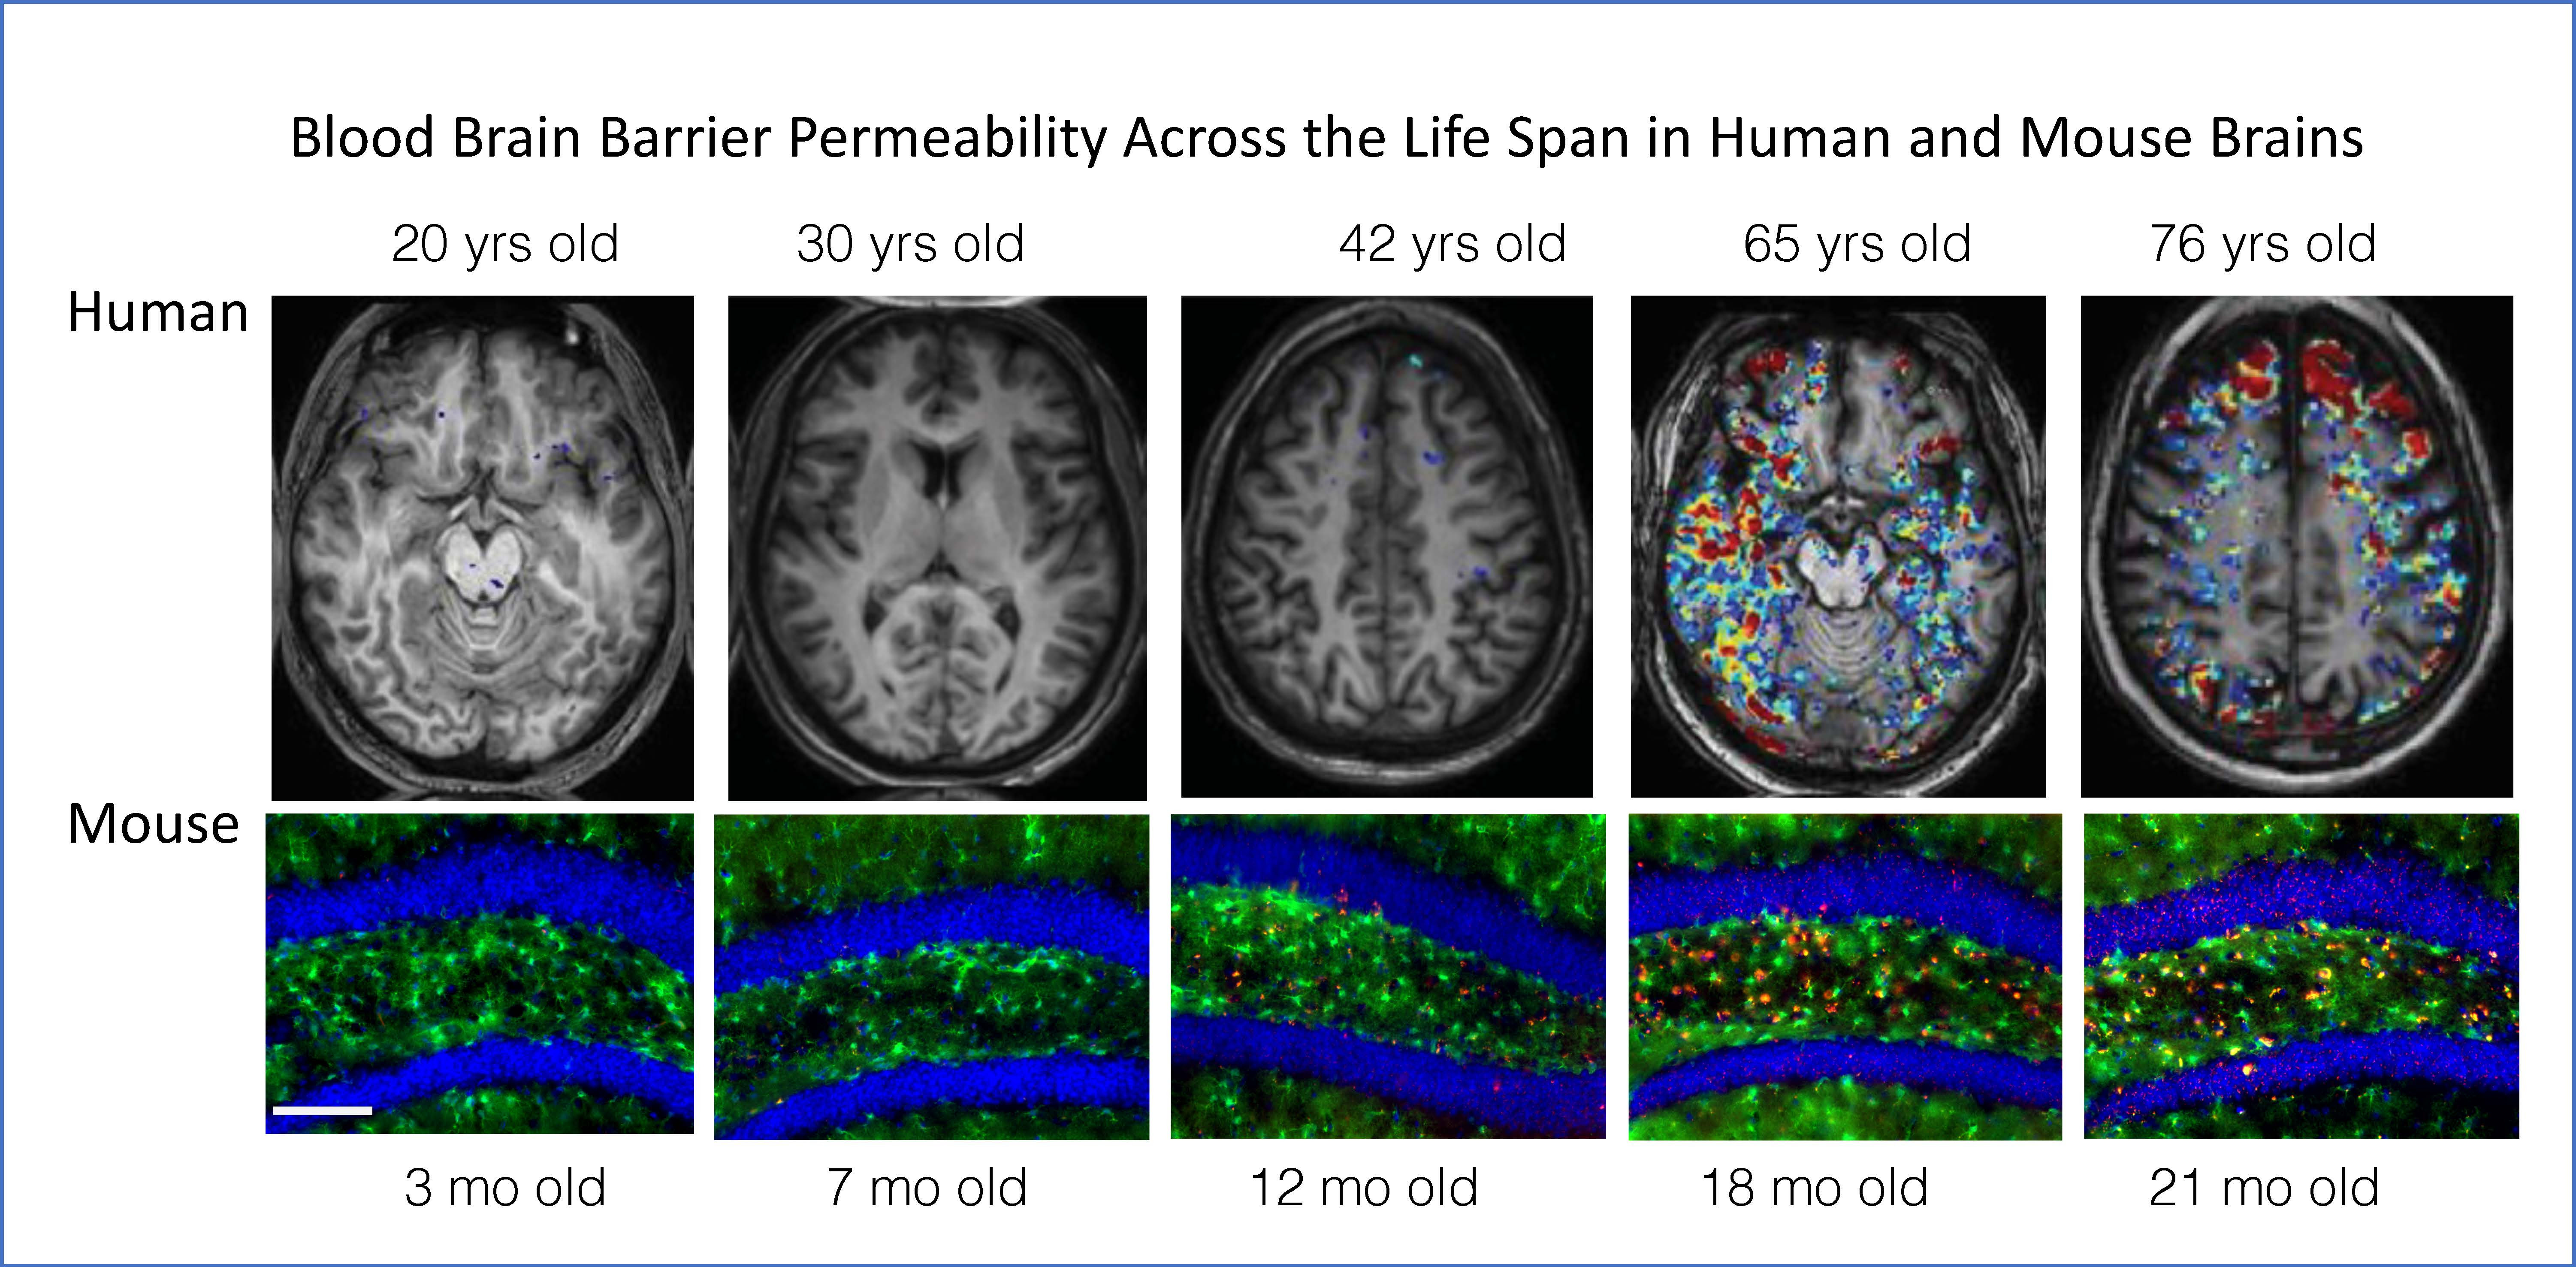 Blood brain barrier paermeability across life span in human and mouse brains